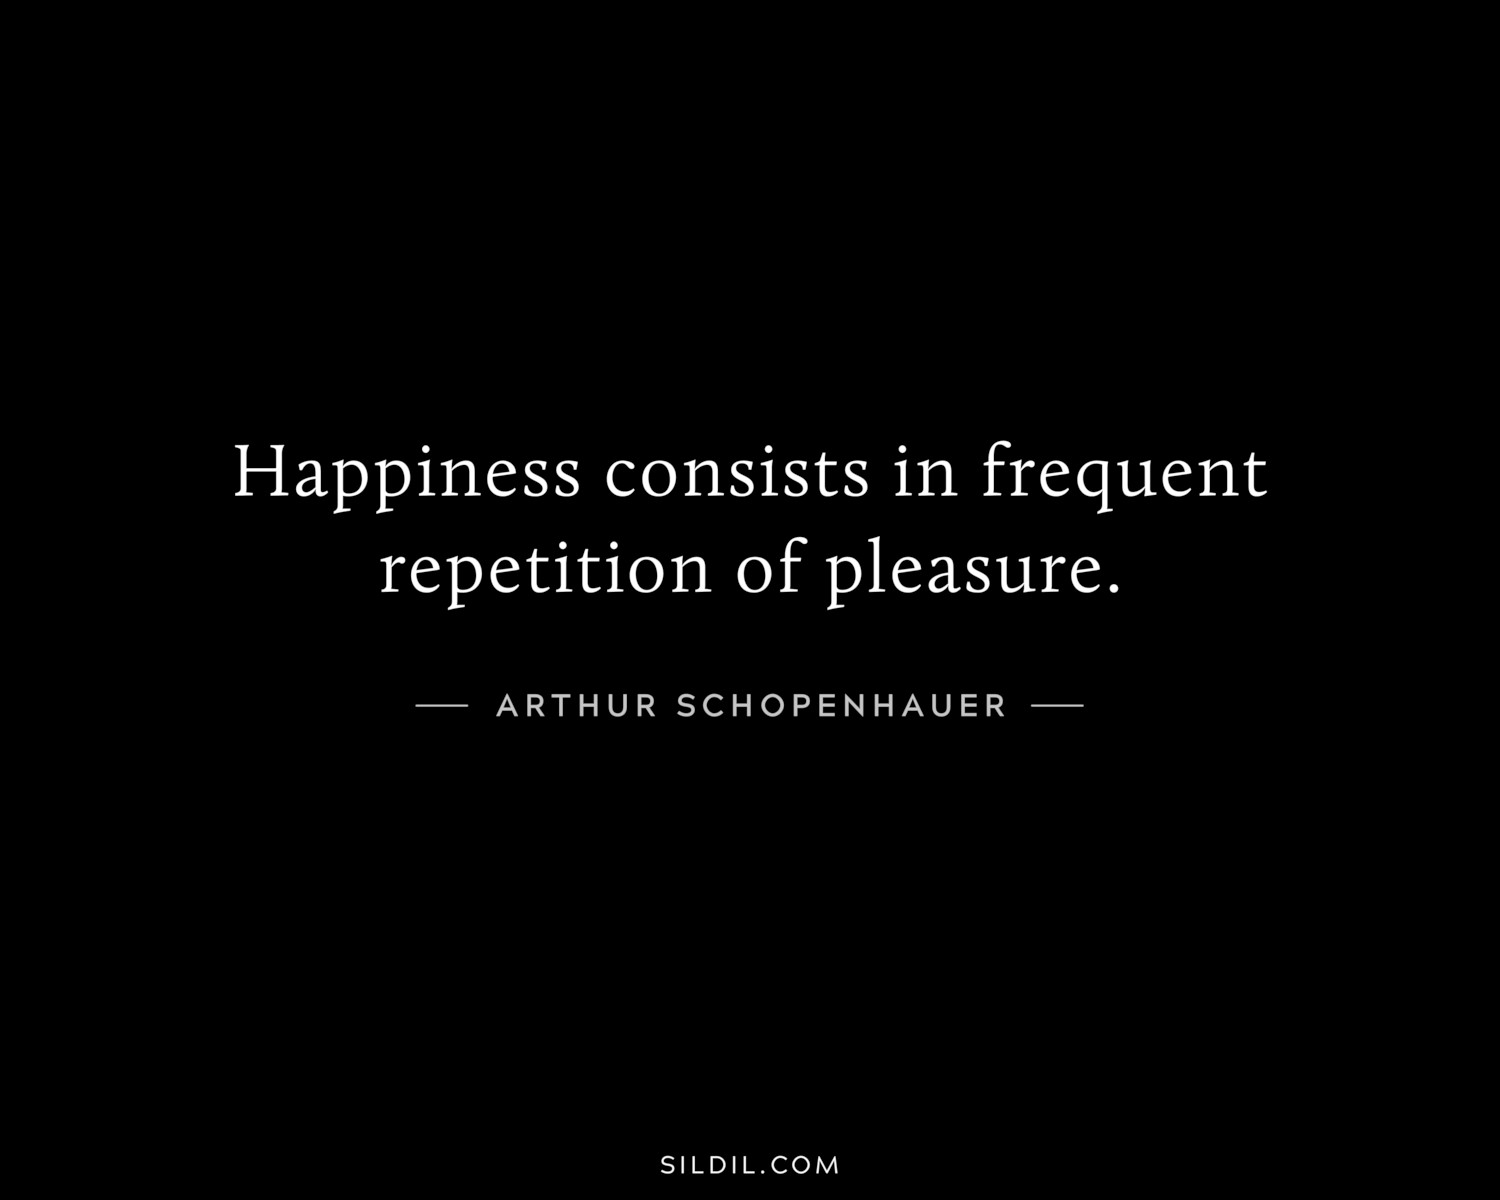 Happiness consists in frequent repetition of pleasure.